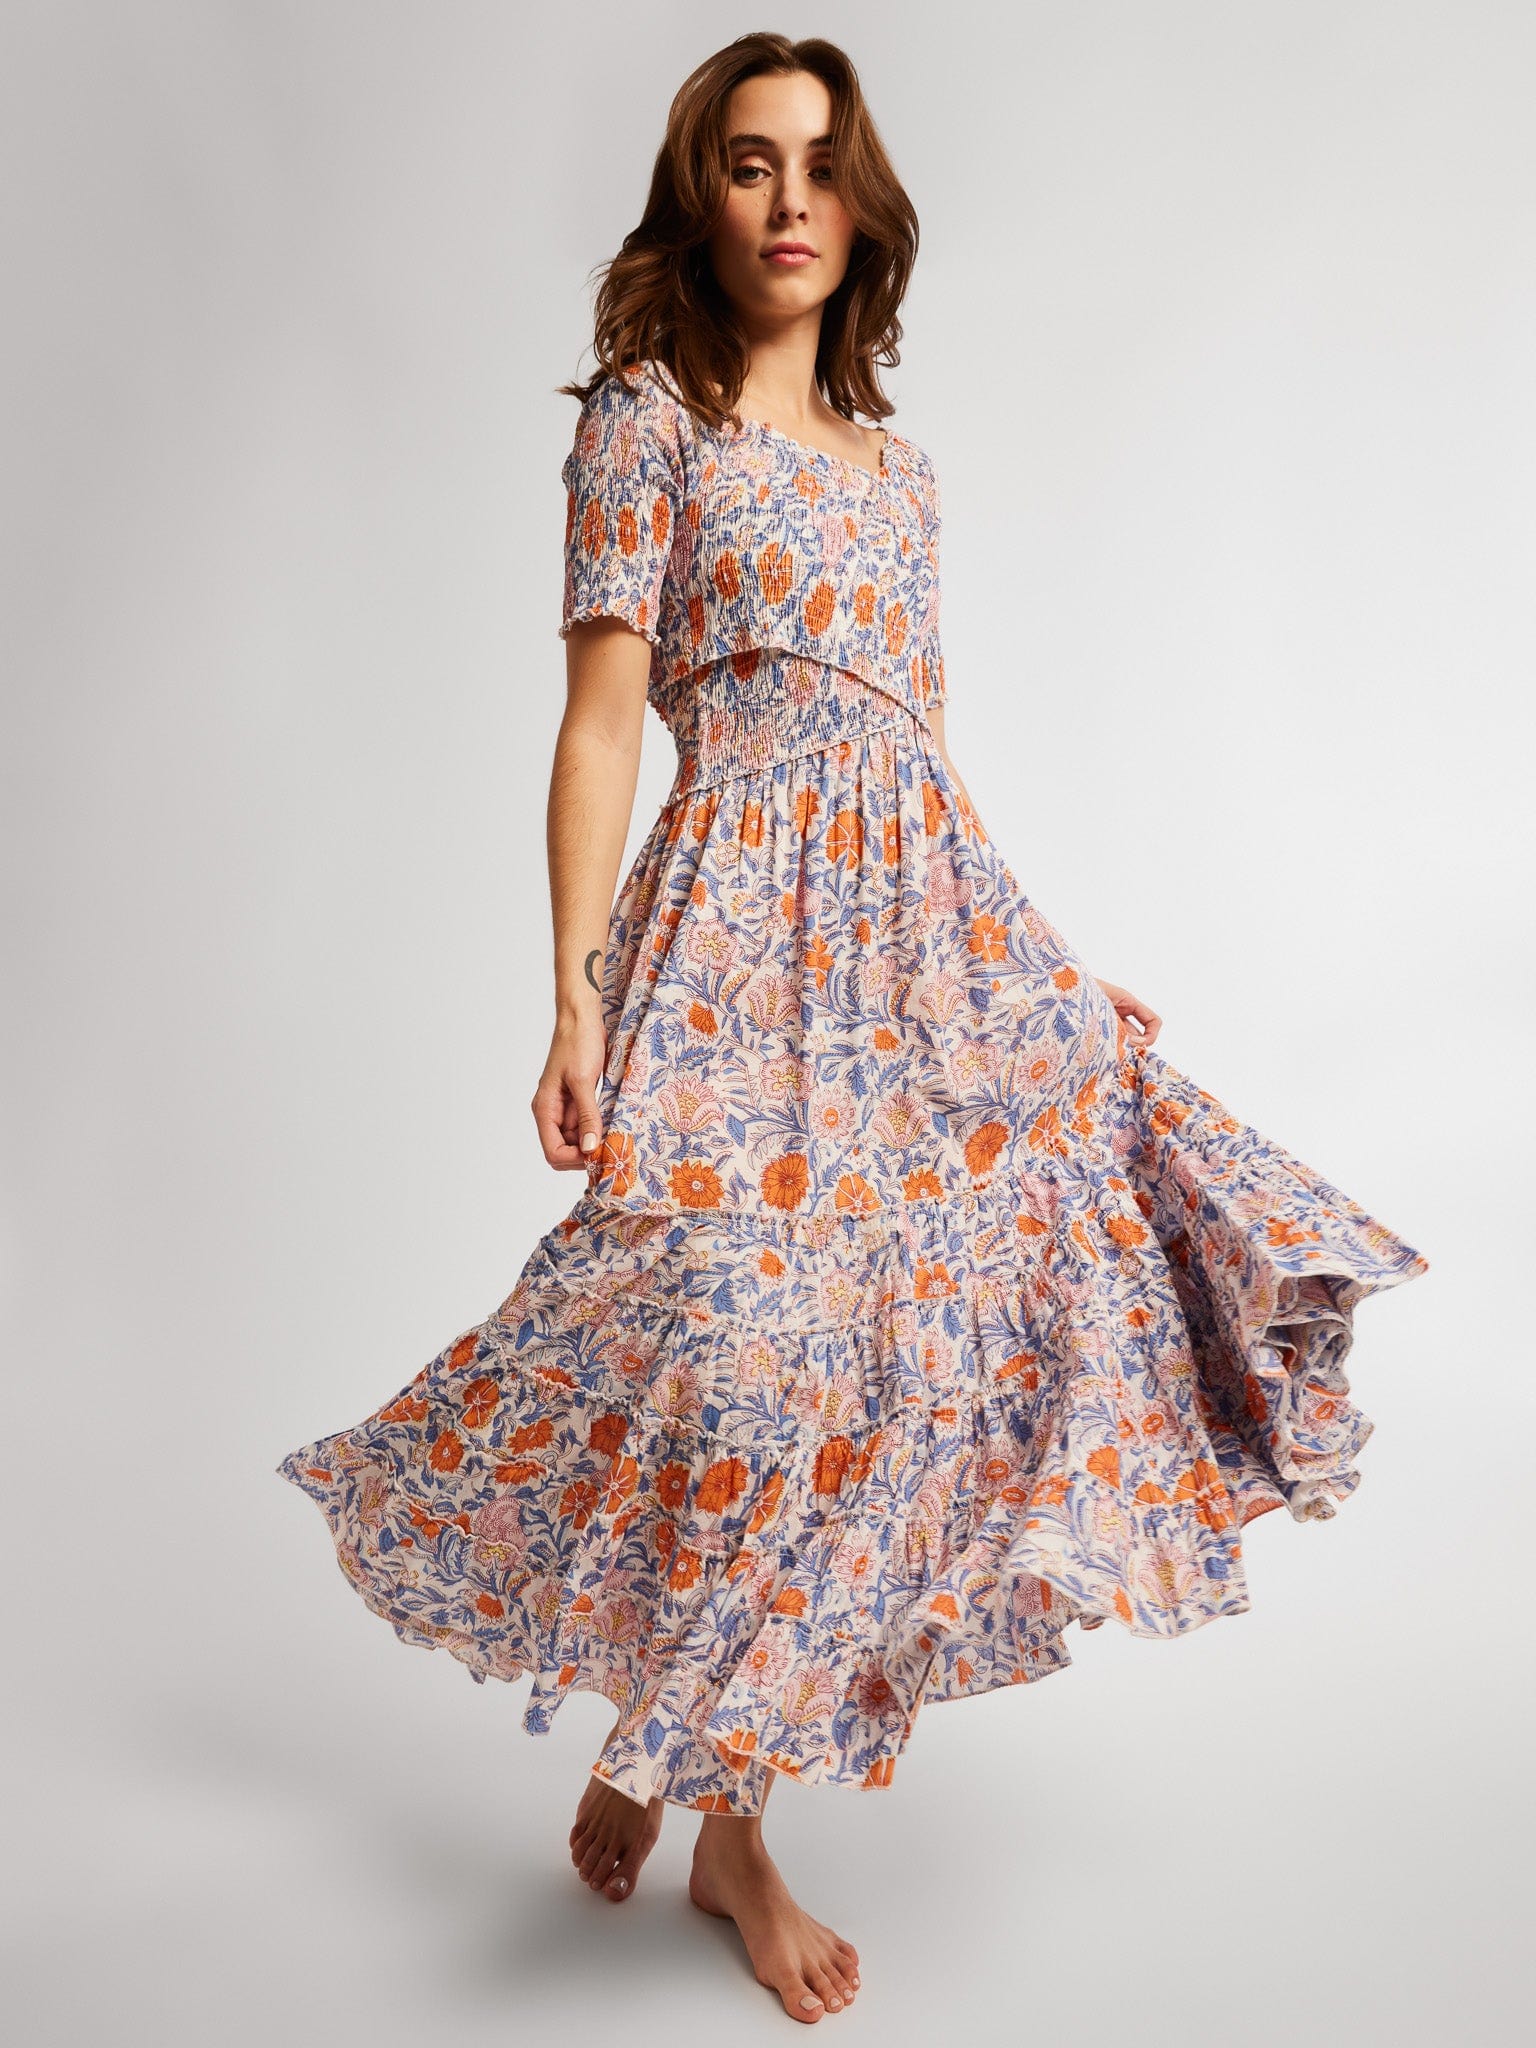 MILLE Clothing Celia Dress in Newport Floral